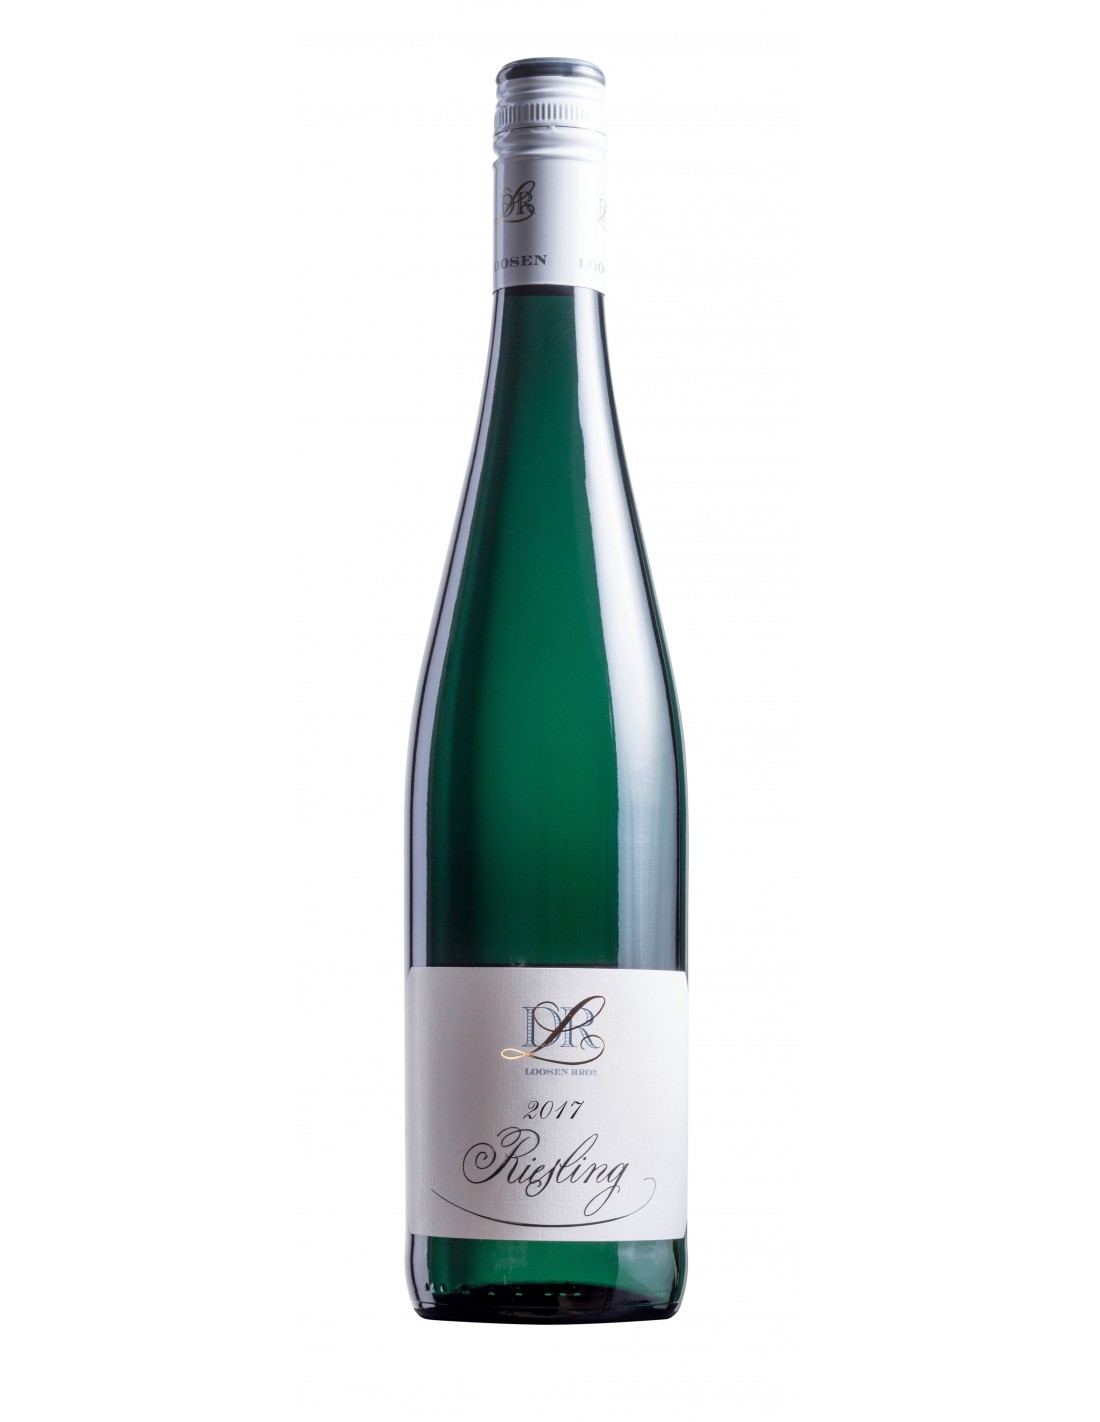 Vin alb, Riesling, Dr. Loosen Moselle, 0.75L, 8.5% alc., Germania